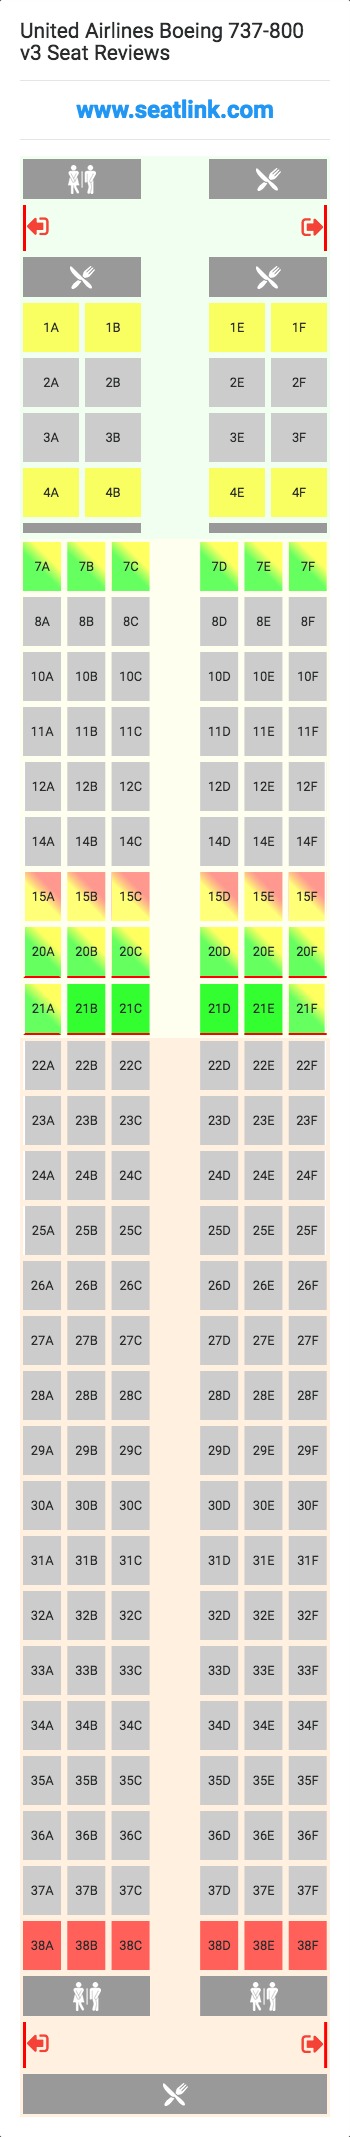 United Airlines Boeing 737-800 v3 (738) Seat Map